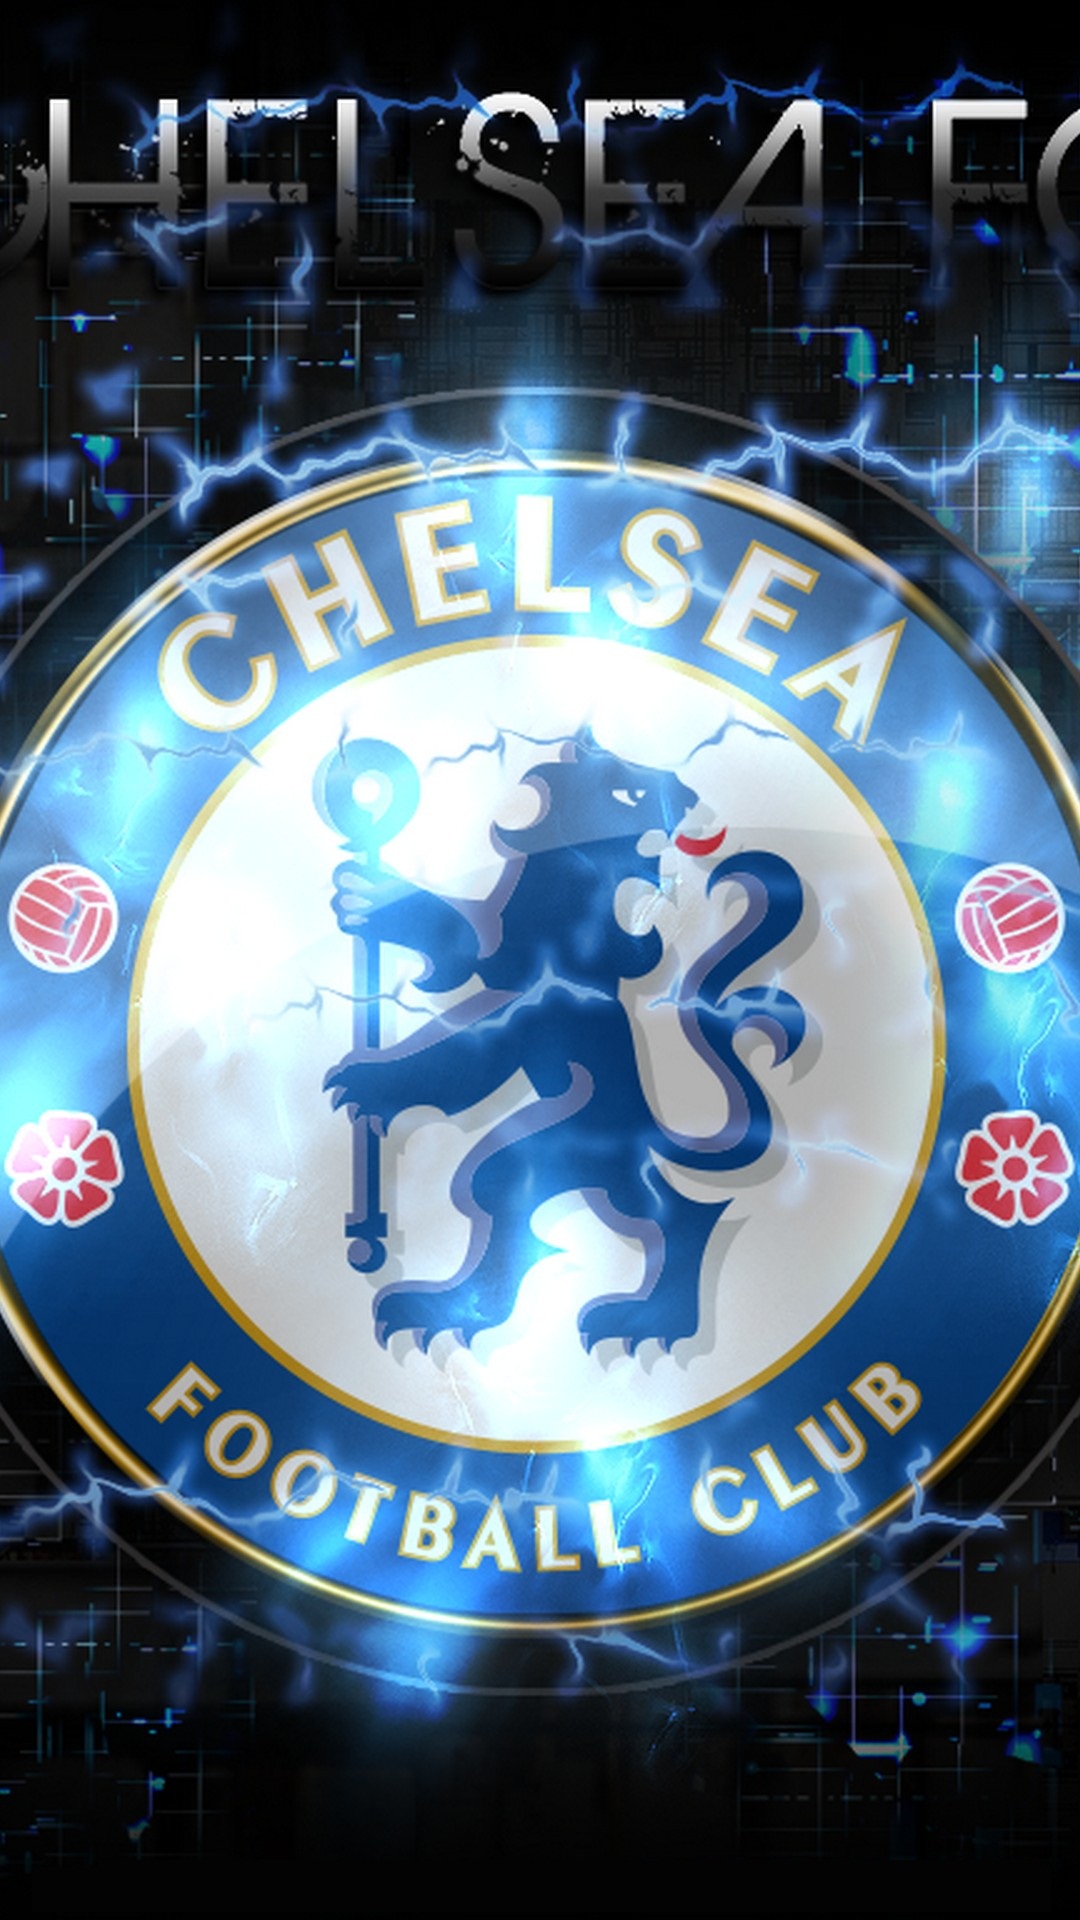 Chelsea Football HD Wallpaper For iPhone with resolution 1080x1920 pixel. You can make this wallpaper for your Mac or Windows Desktop Background, iPhone, Android or Tablet and another Smartphone device